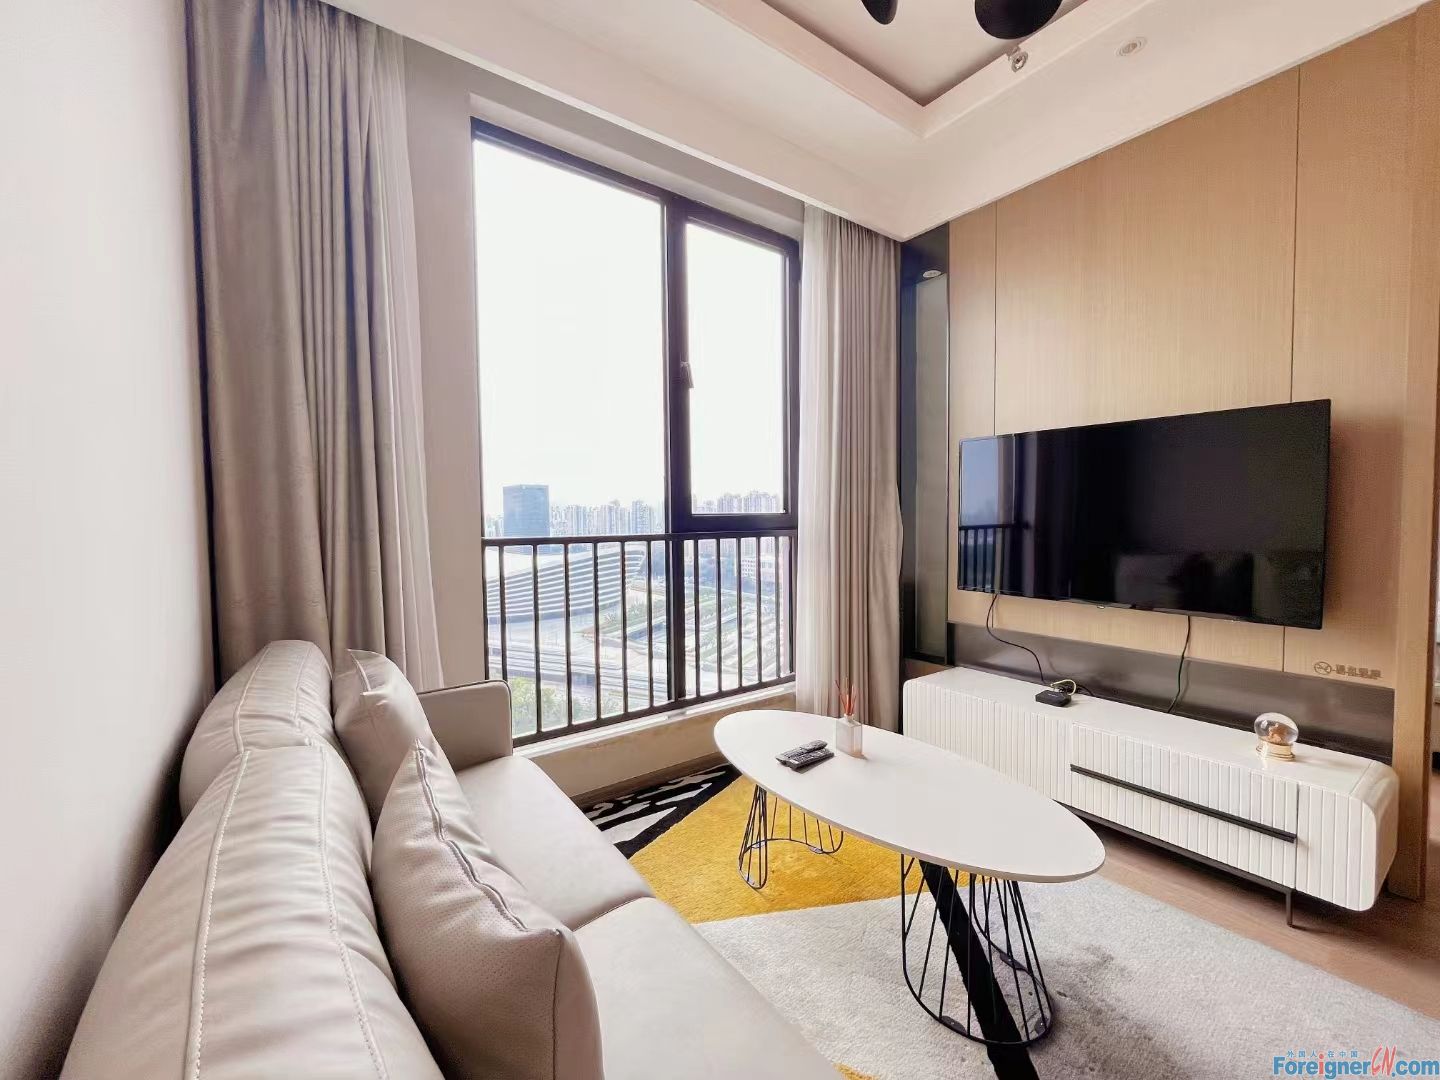 New !!! Serviced apartment Glory Mansion to rent in SIP/ 2 bedrooms, 1 bathroom/Suzhou SSIS/OCAC/SIPFLS/Nearby Olympic Center,Park，Subway Station，A lot of restaurants,Gym 